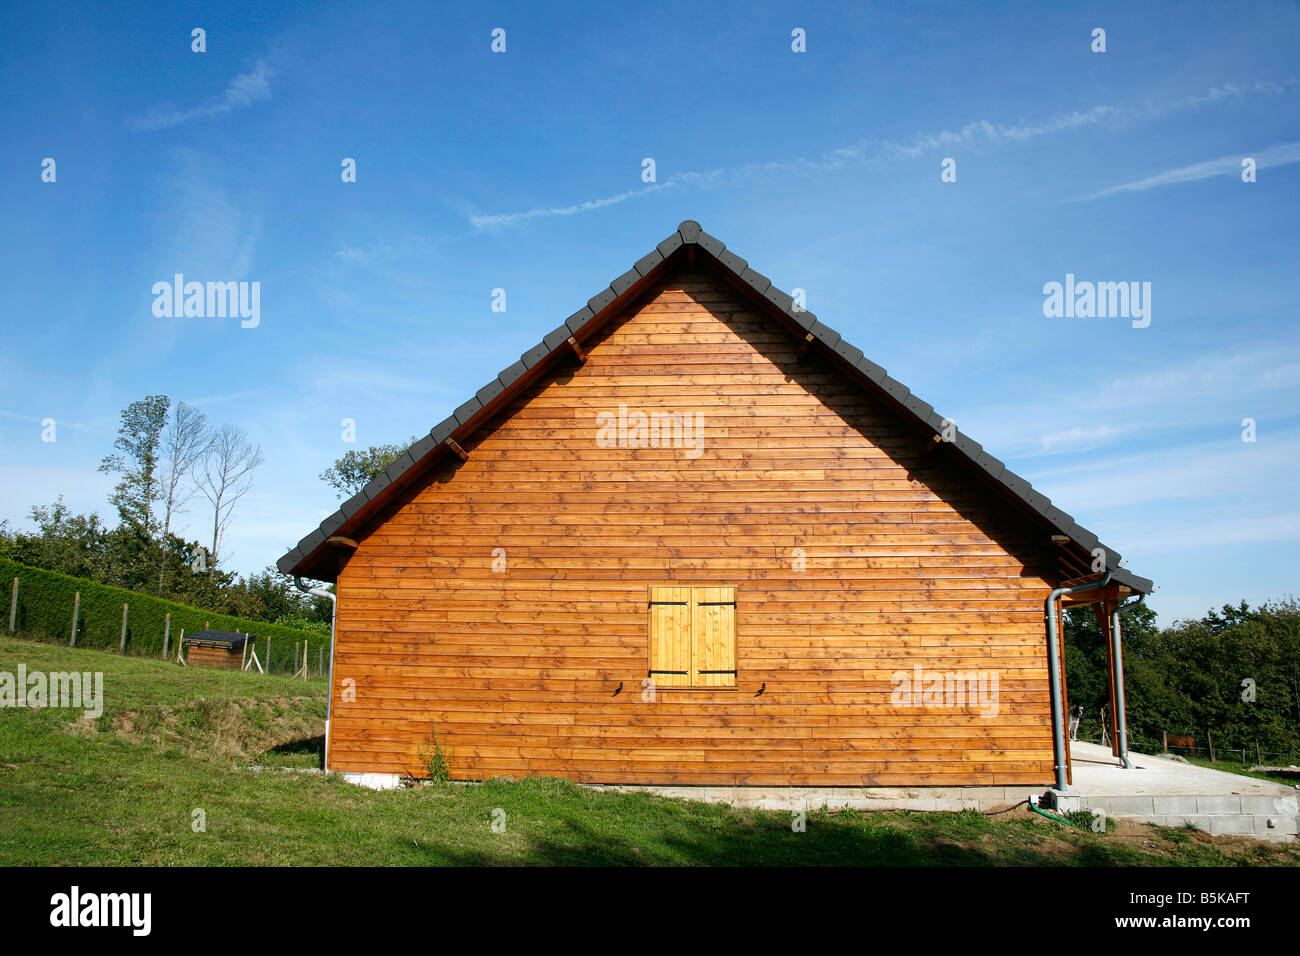 Wooden chalet in green garden and blue sky Correze France Stock Photo